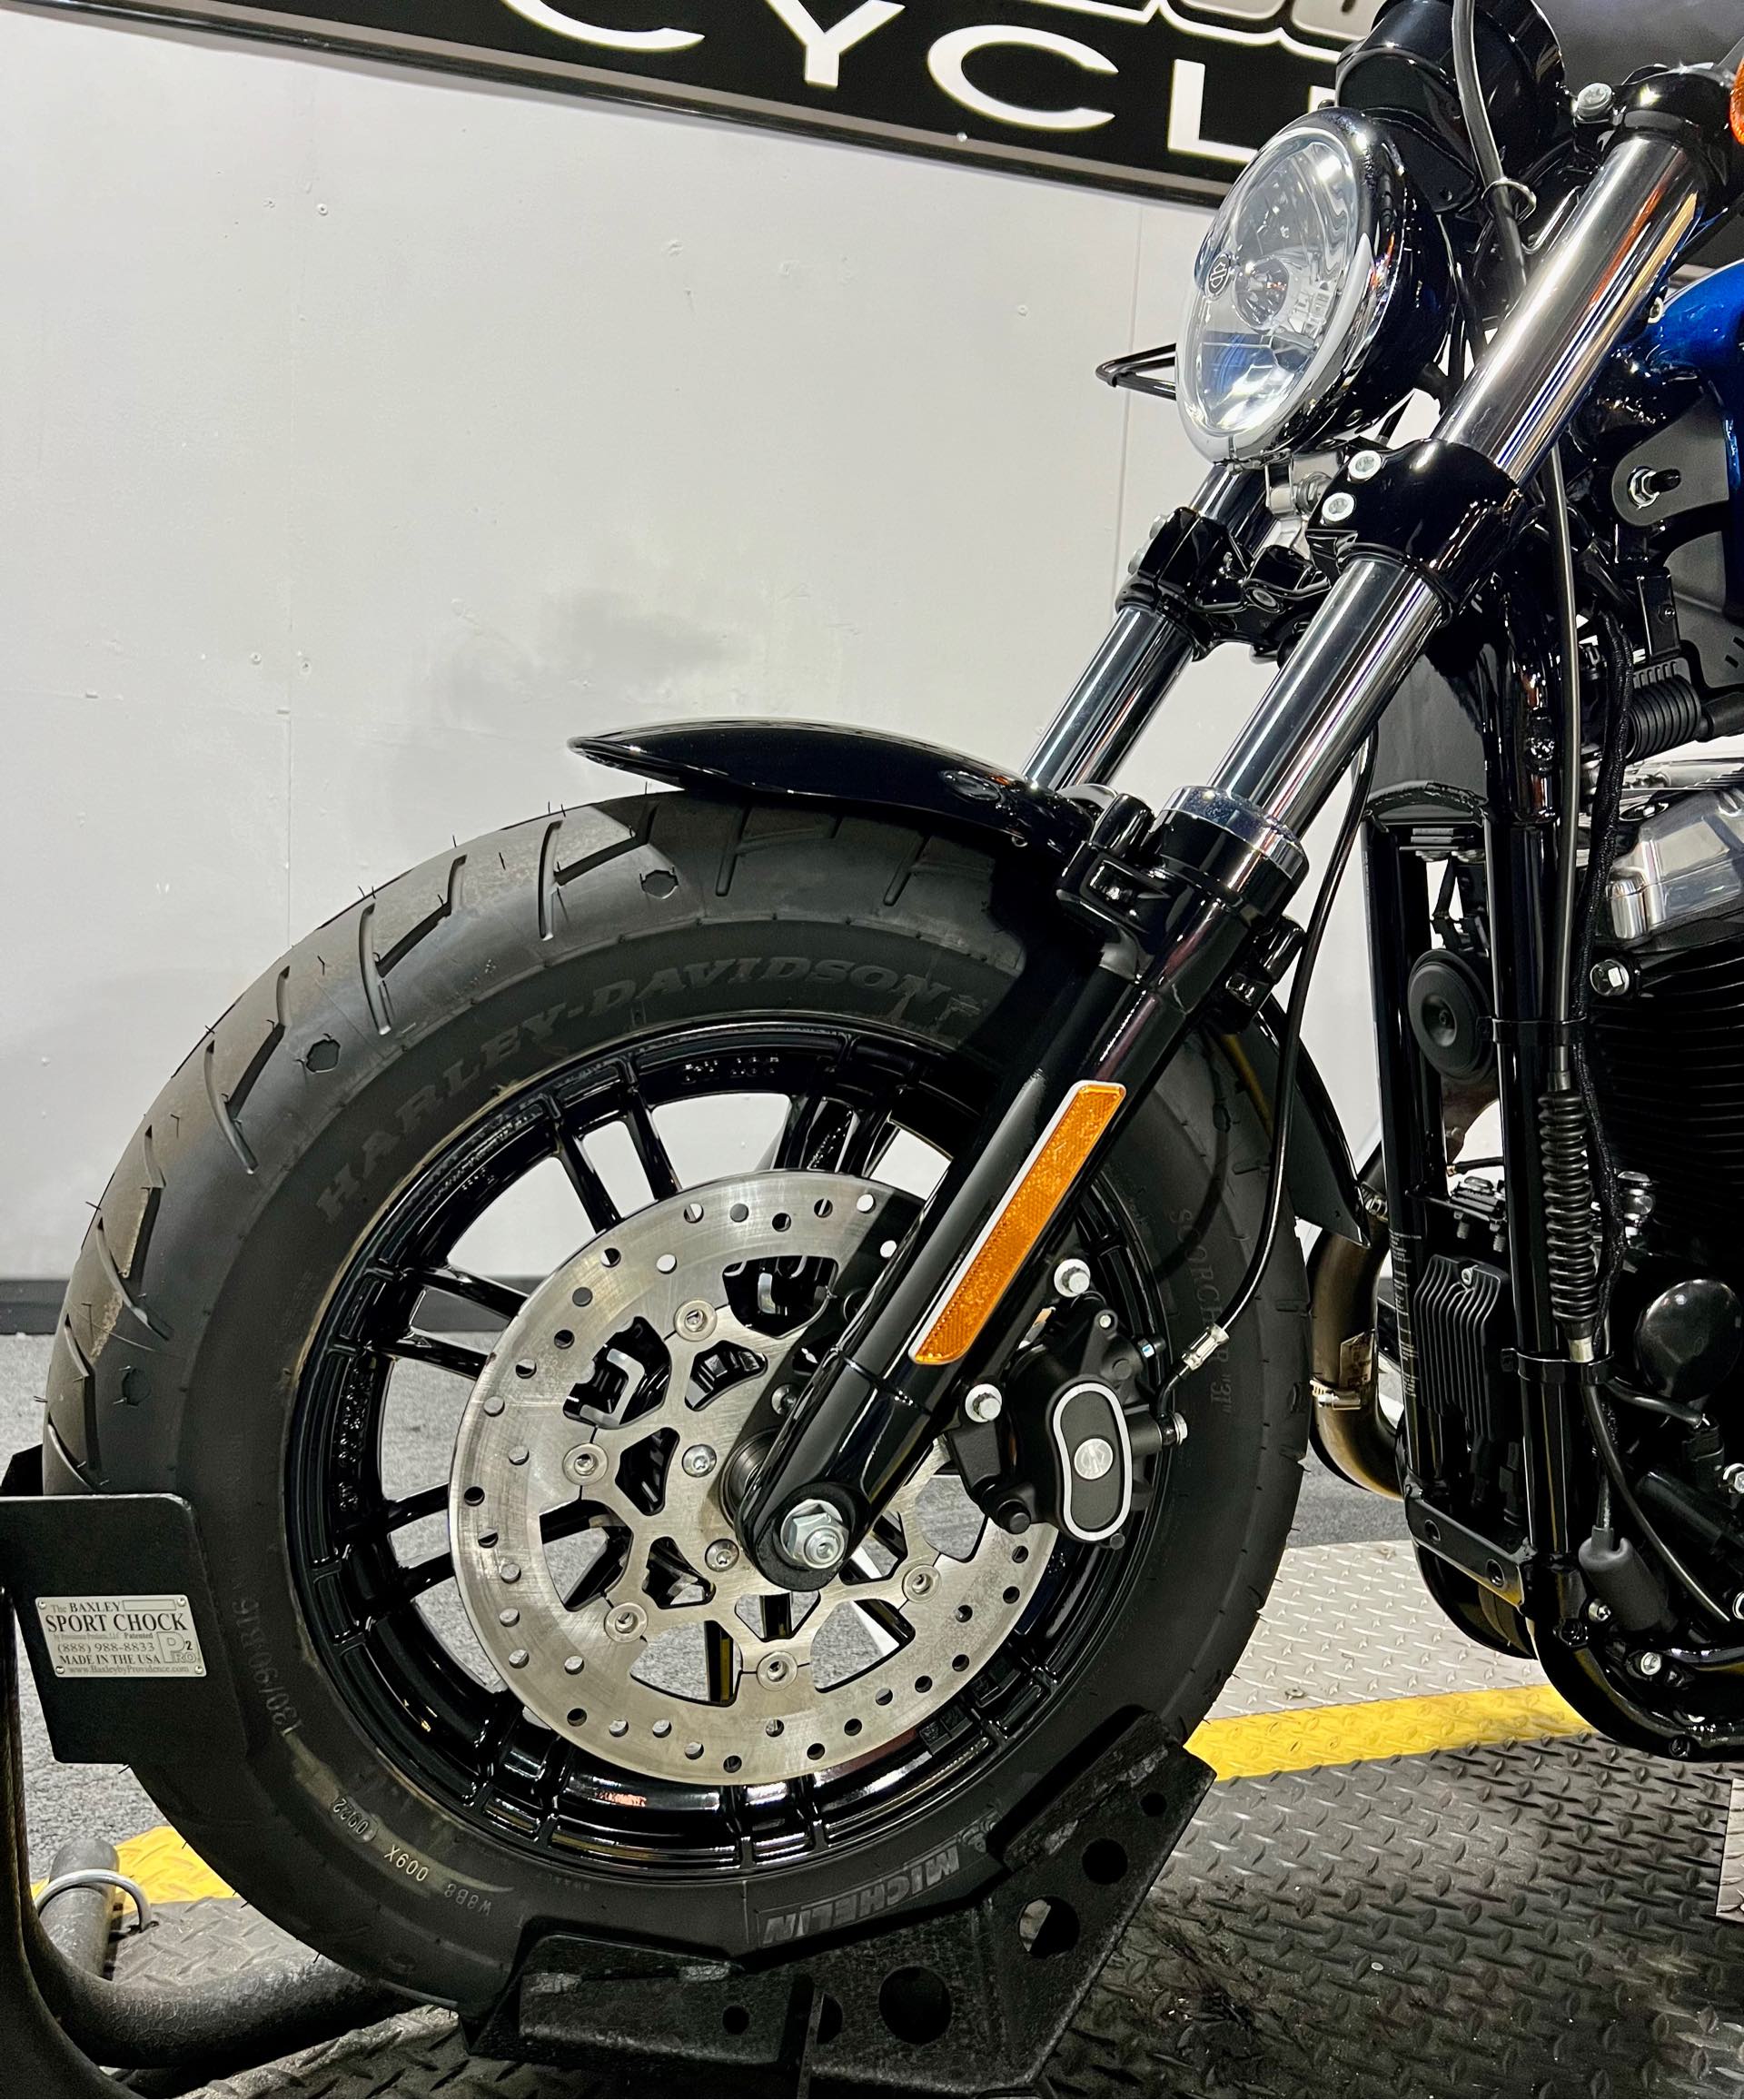 2022 Harley-Davidson Sportster Forty-Eight at Southwest Cycle, Cape Coral, FL 33909